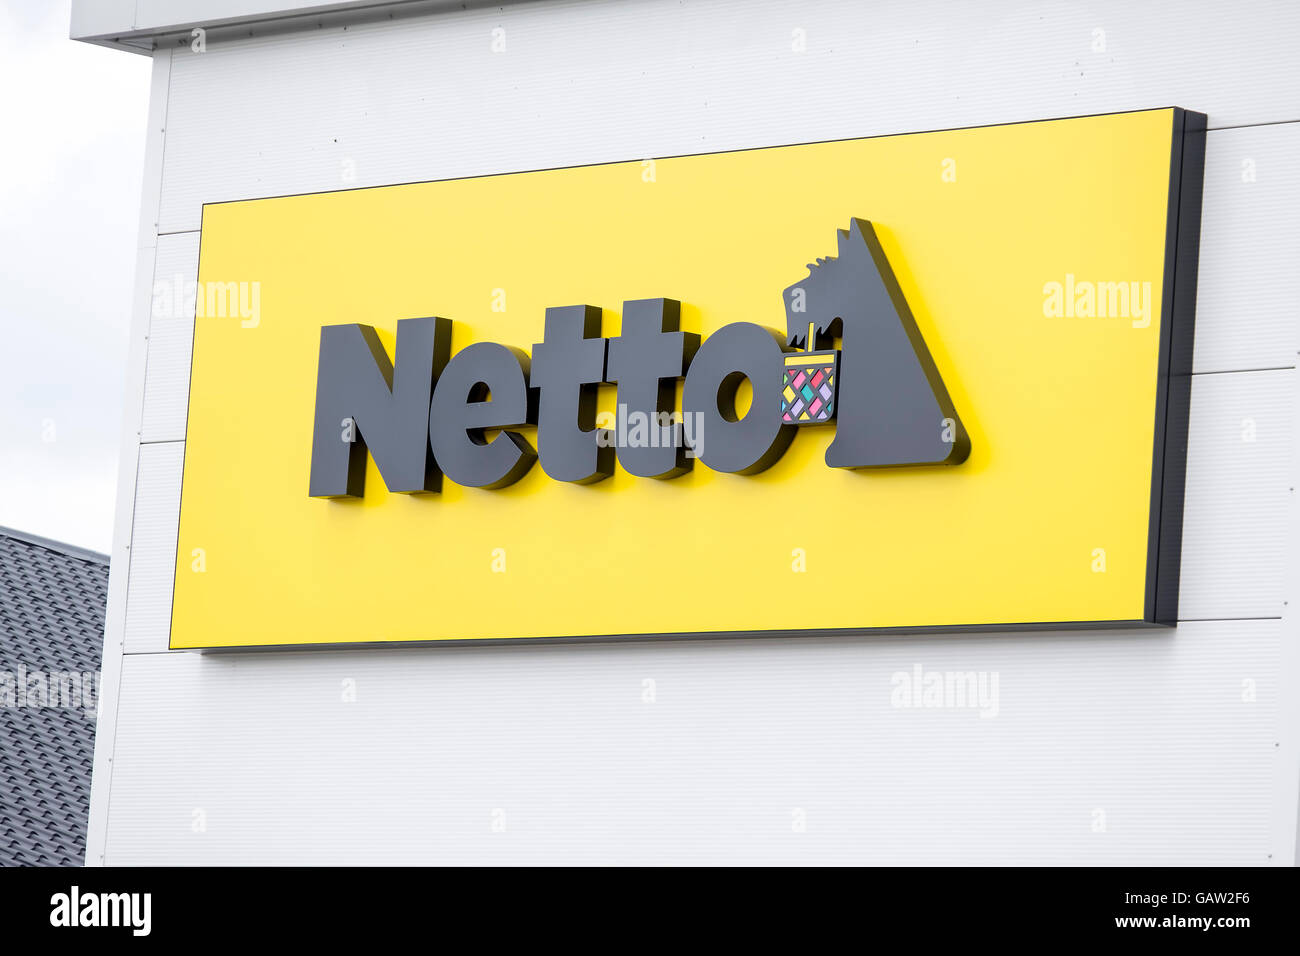 Netto supermarket in the uk, before its closure as they pull out of the uk. Stock Photo